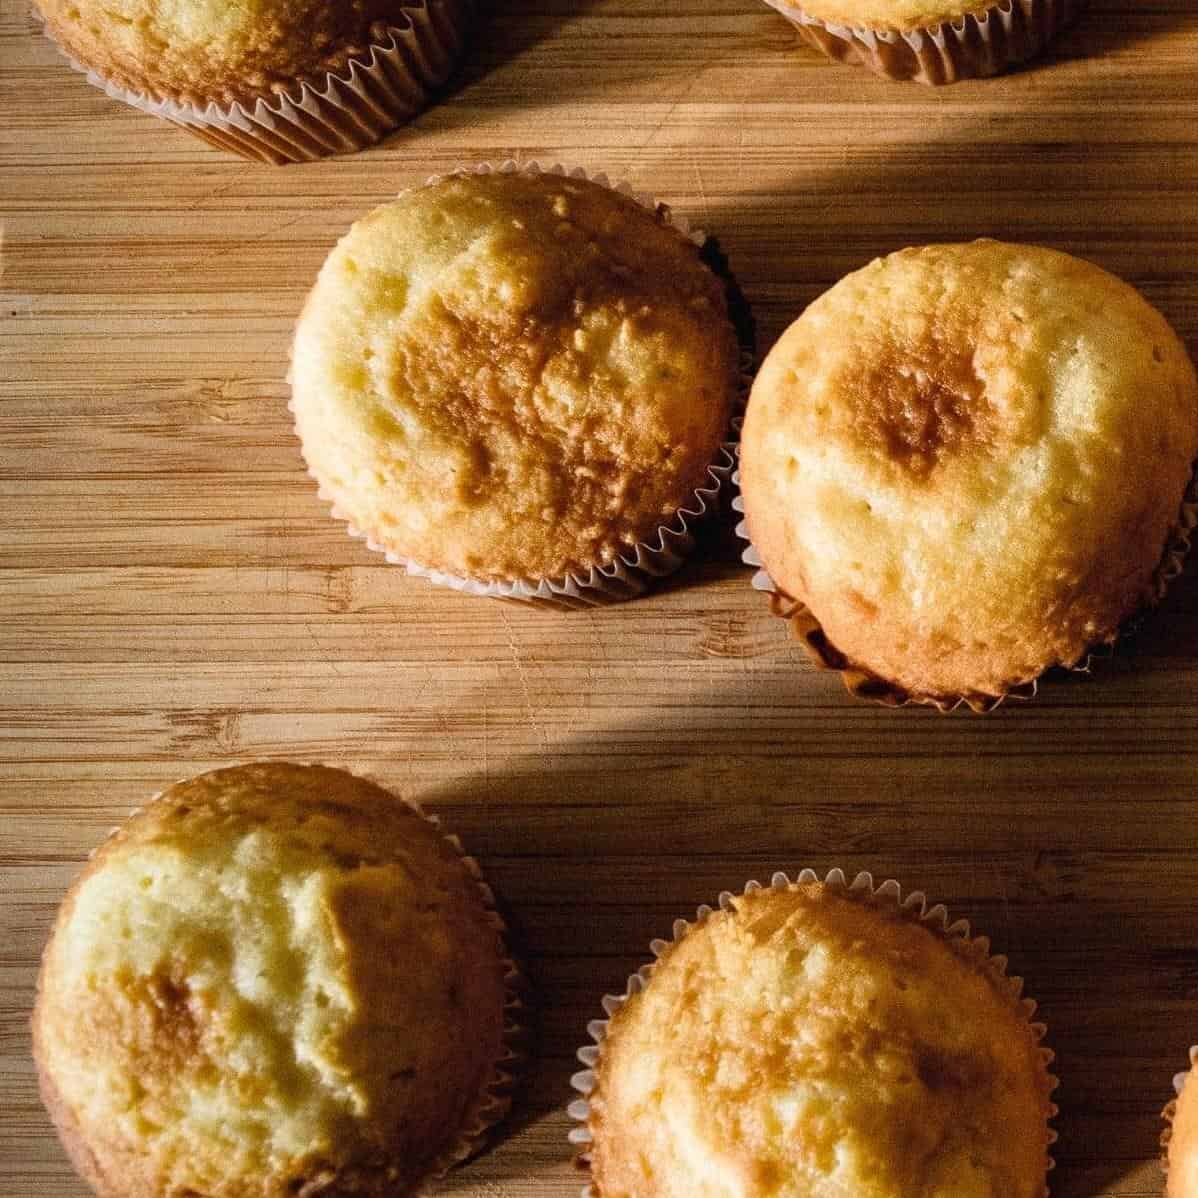  These muffins are like a warm hug in dessert form.